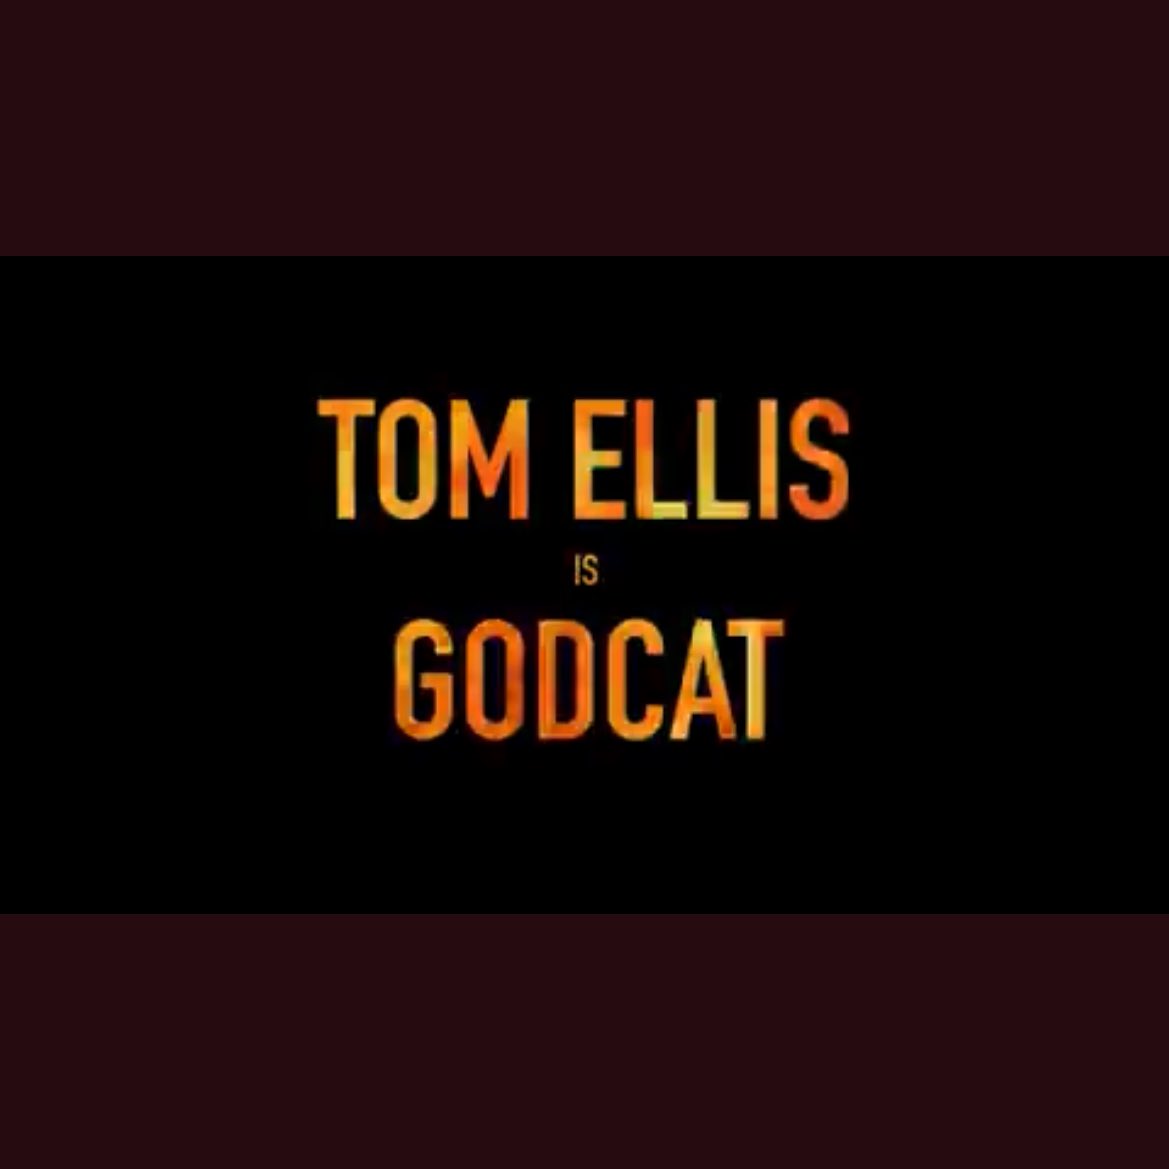 THANK YOU NETFLIX 🥹  
NOW ANOTHER LITTLE EFFORT AND RELEASE PLAYERS ❤️ 
#TomEllis #GeekedWeek #ExplodingKittens